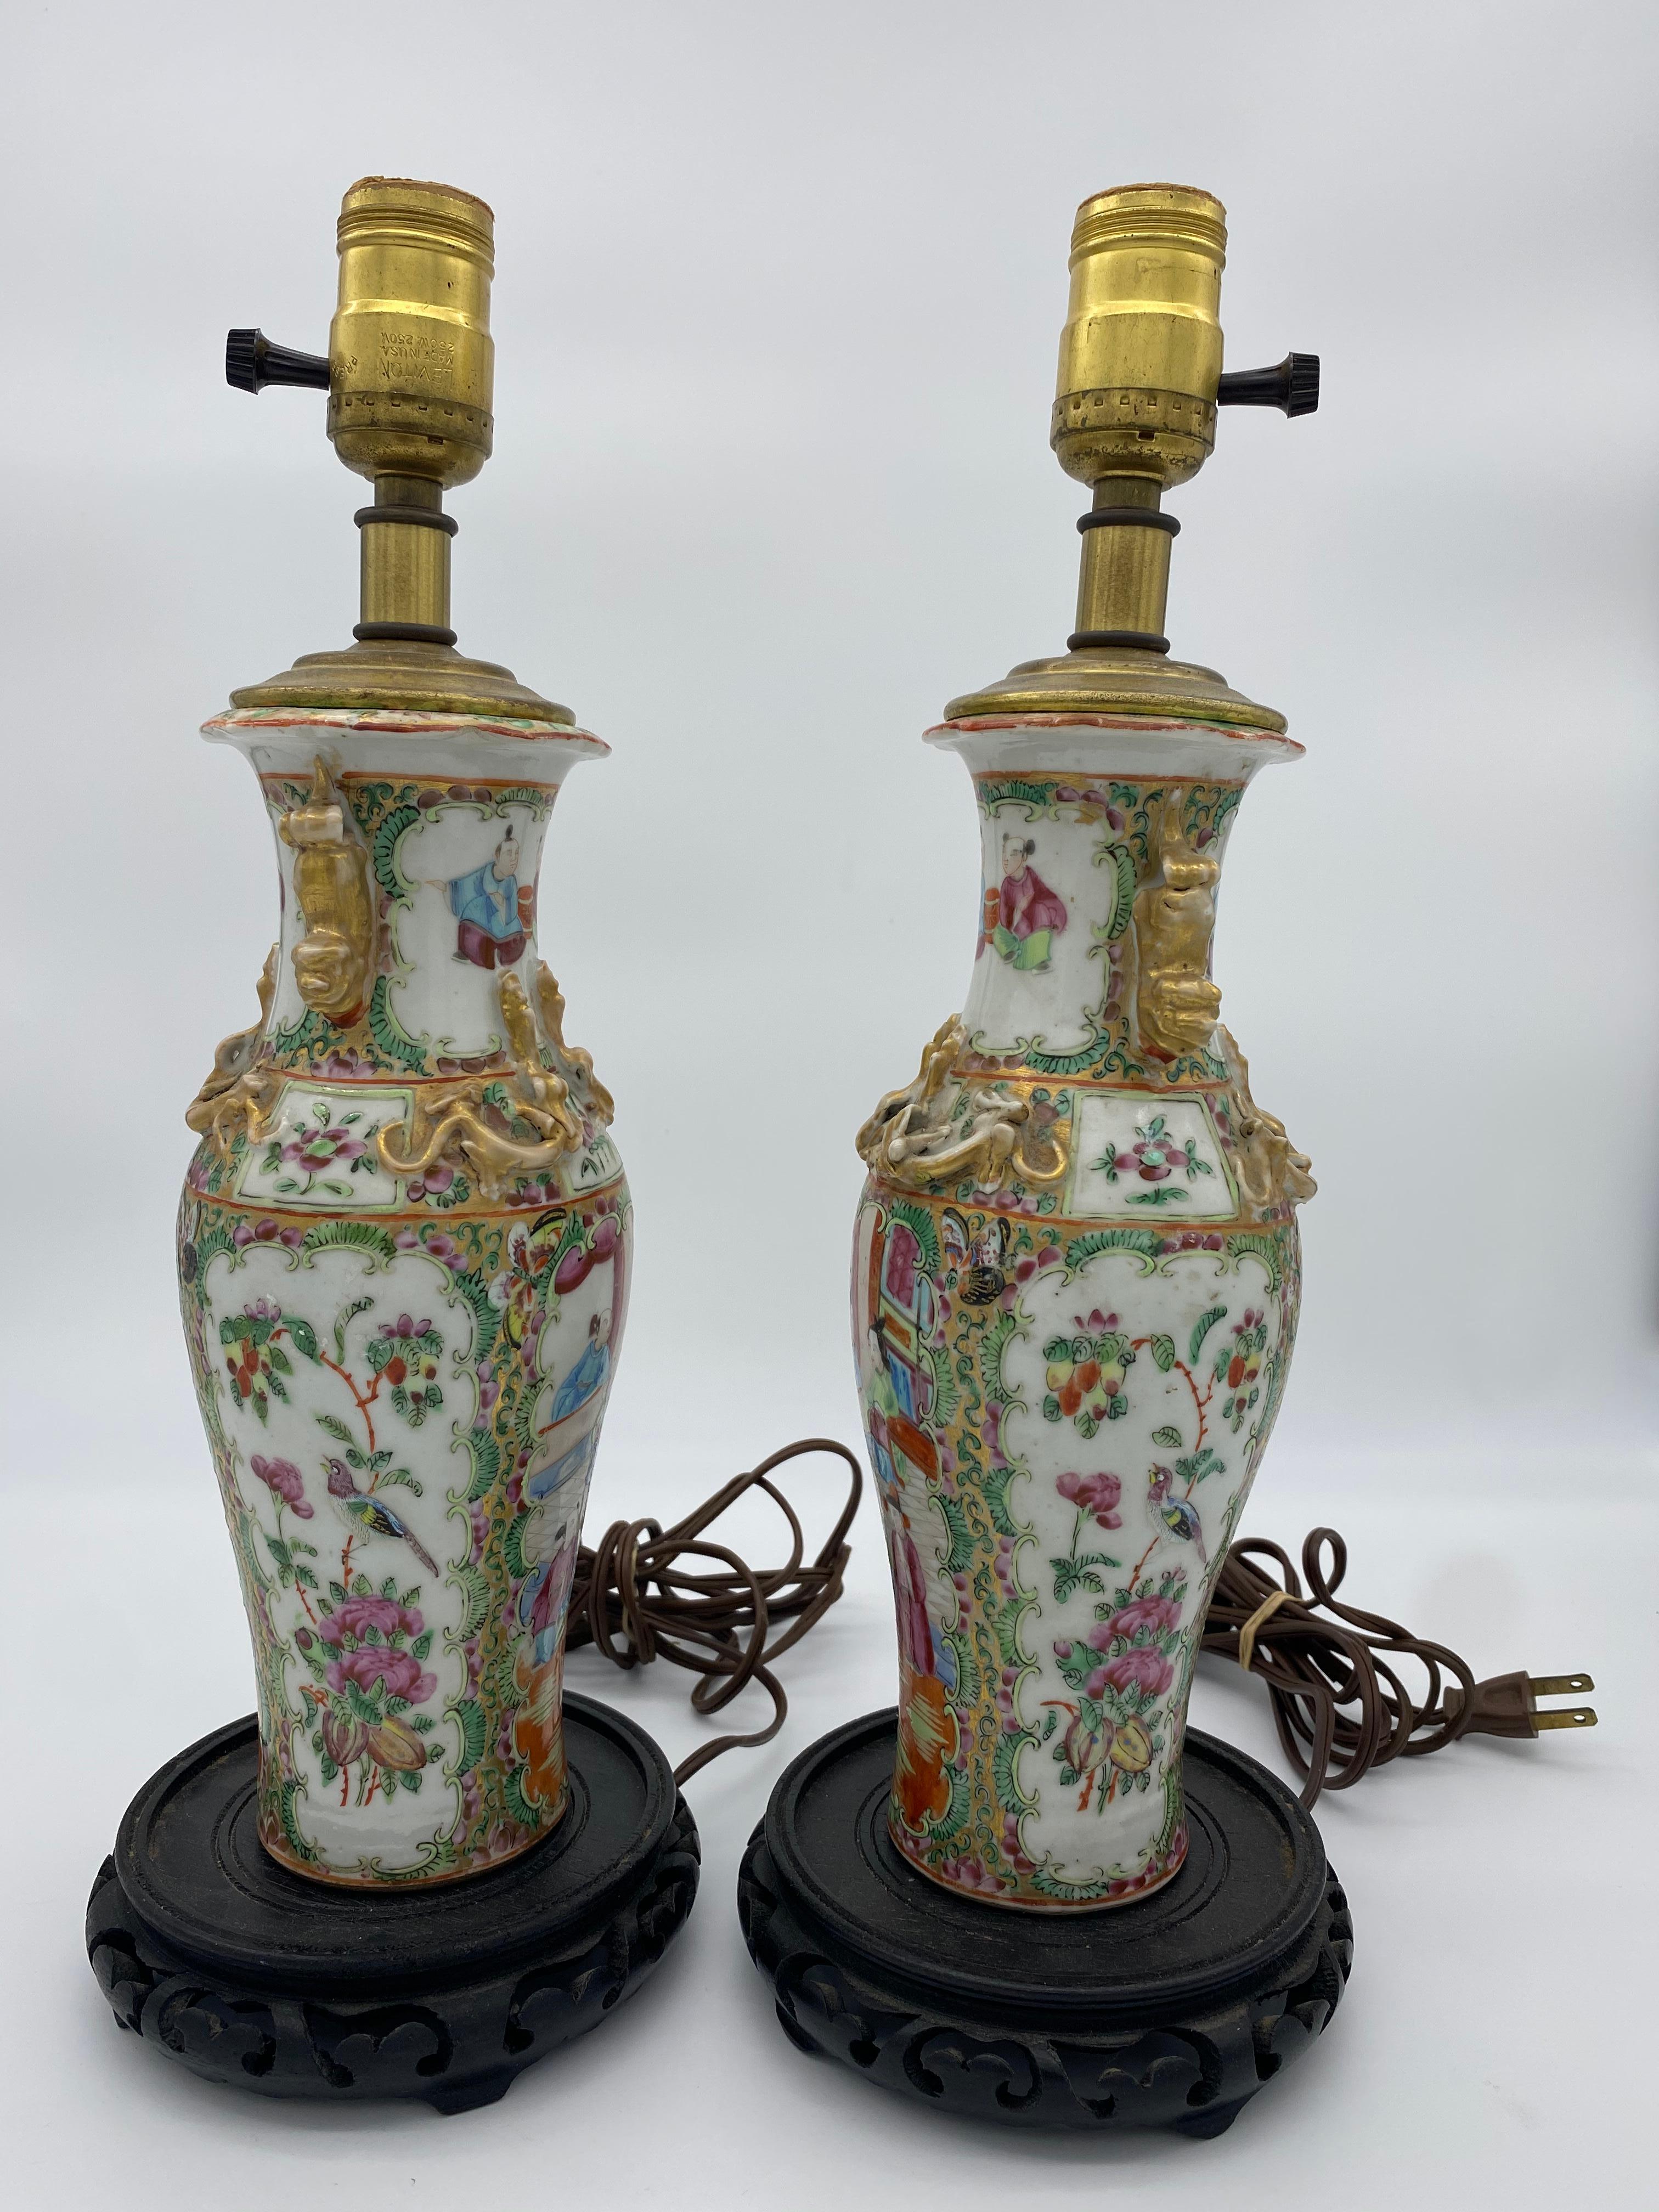 19th century Chinese porcelain vase now mounted as lamps. Decorated with beautiful flowers and a family. Vase not including lamp is 10 inches tall.